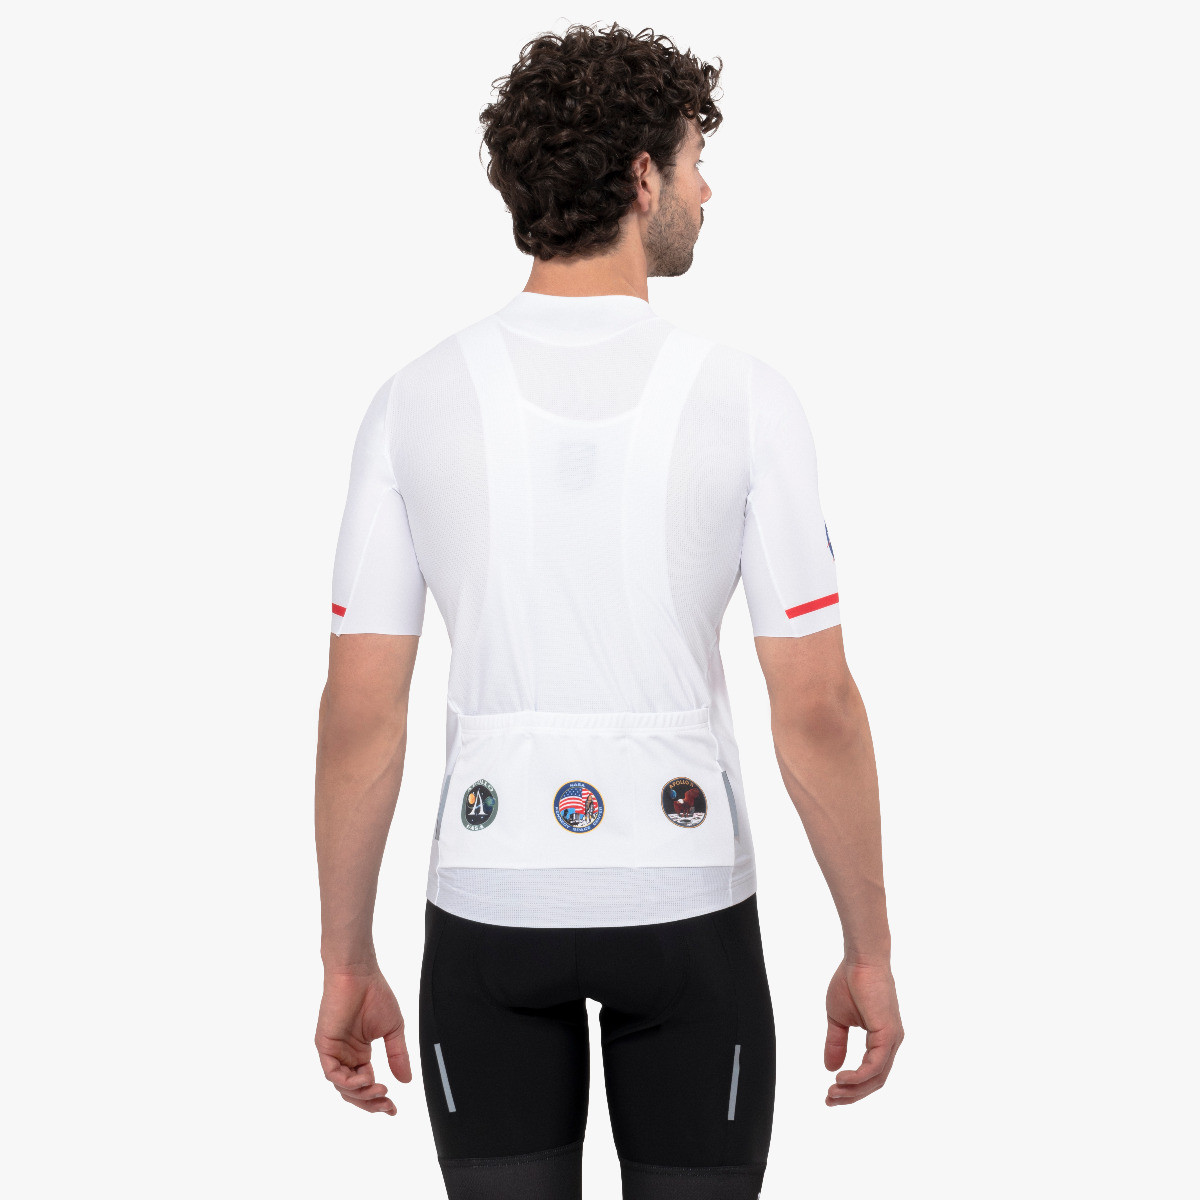 scicon space agency cycling clothing jersey nasa 20